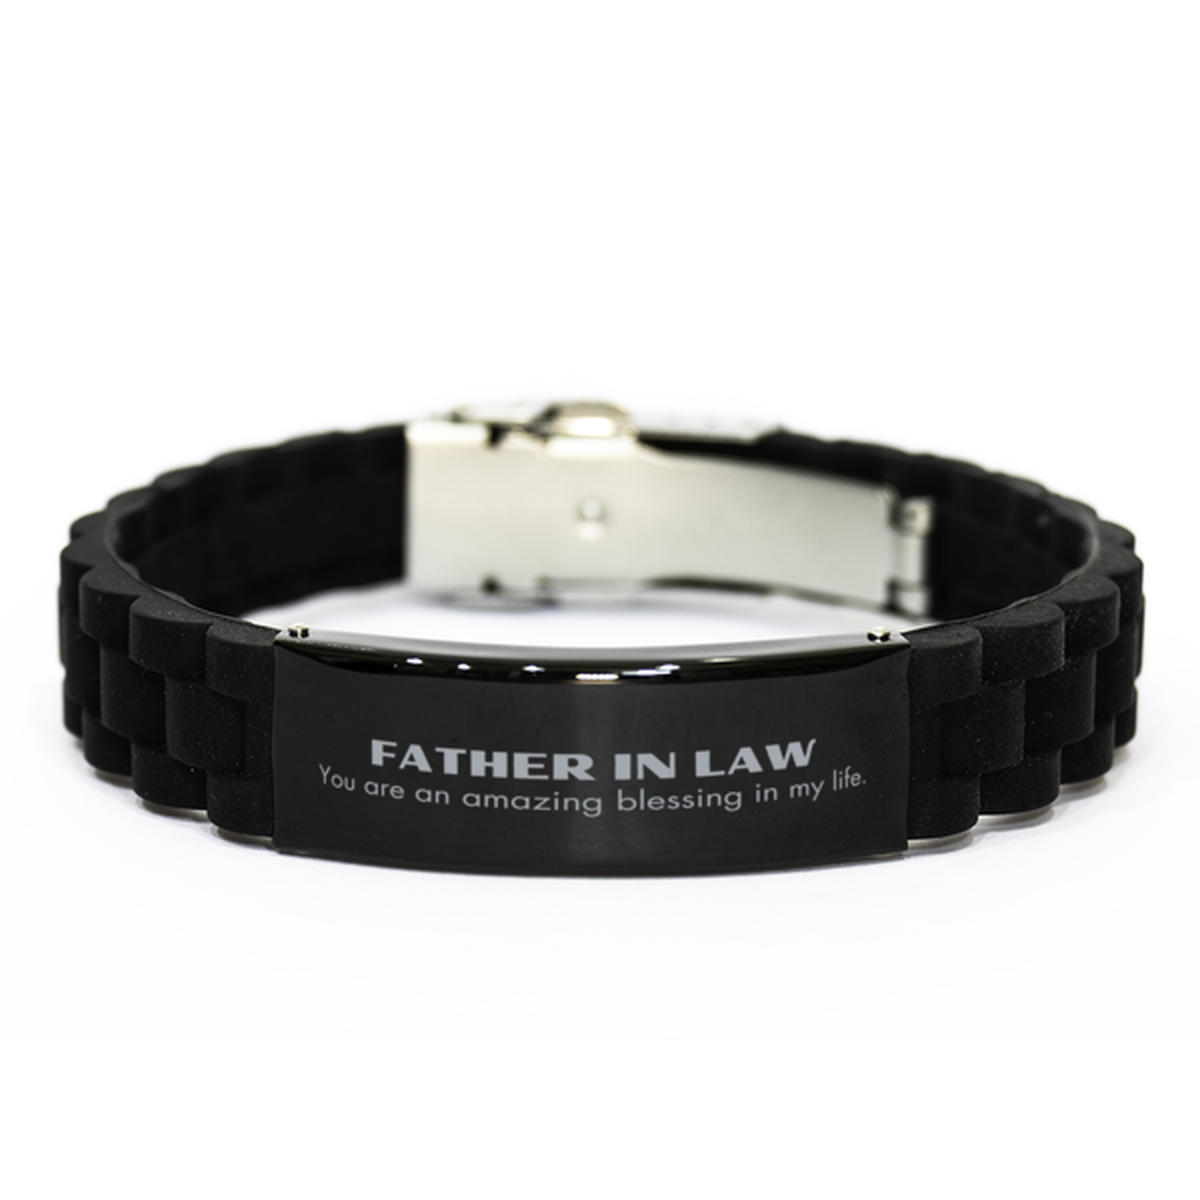 Father In Law Black Glidelock Clasp Bracelet, You are an amazing blessing in my life, Thank You Gifts For Father In Law, Inspirational Birthday Christmas Unique Gifts For Father In Law